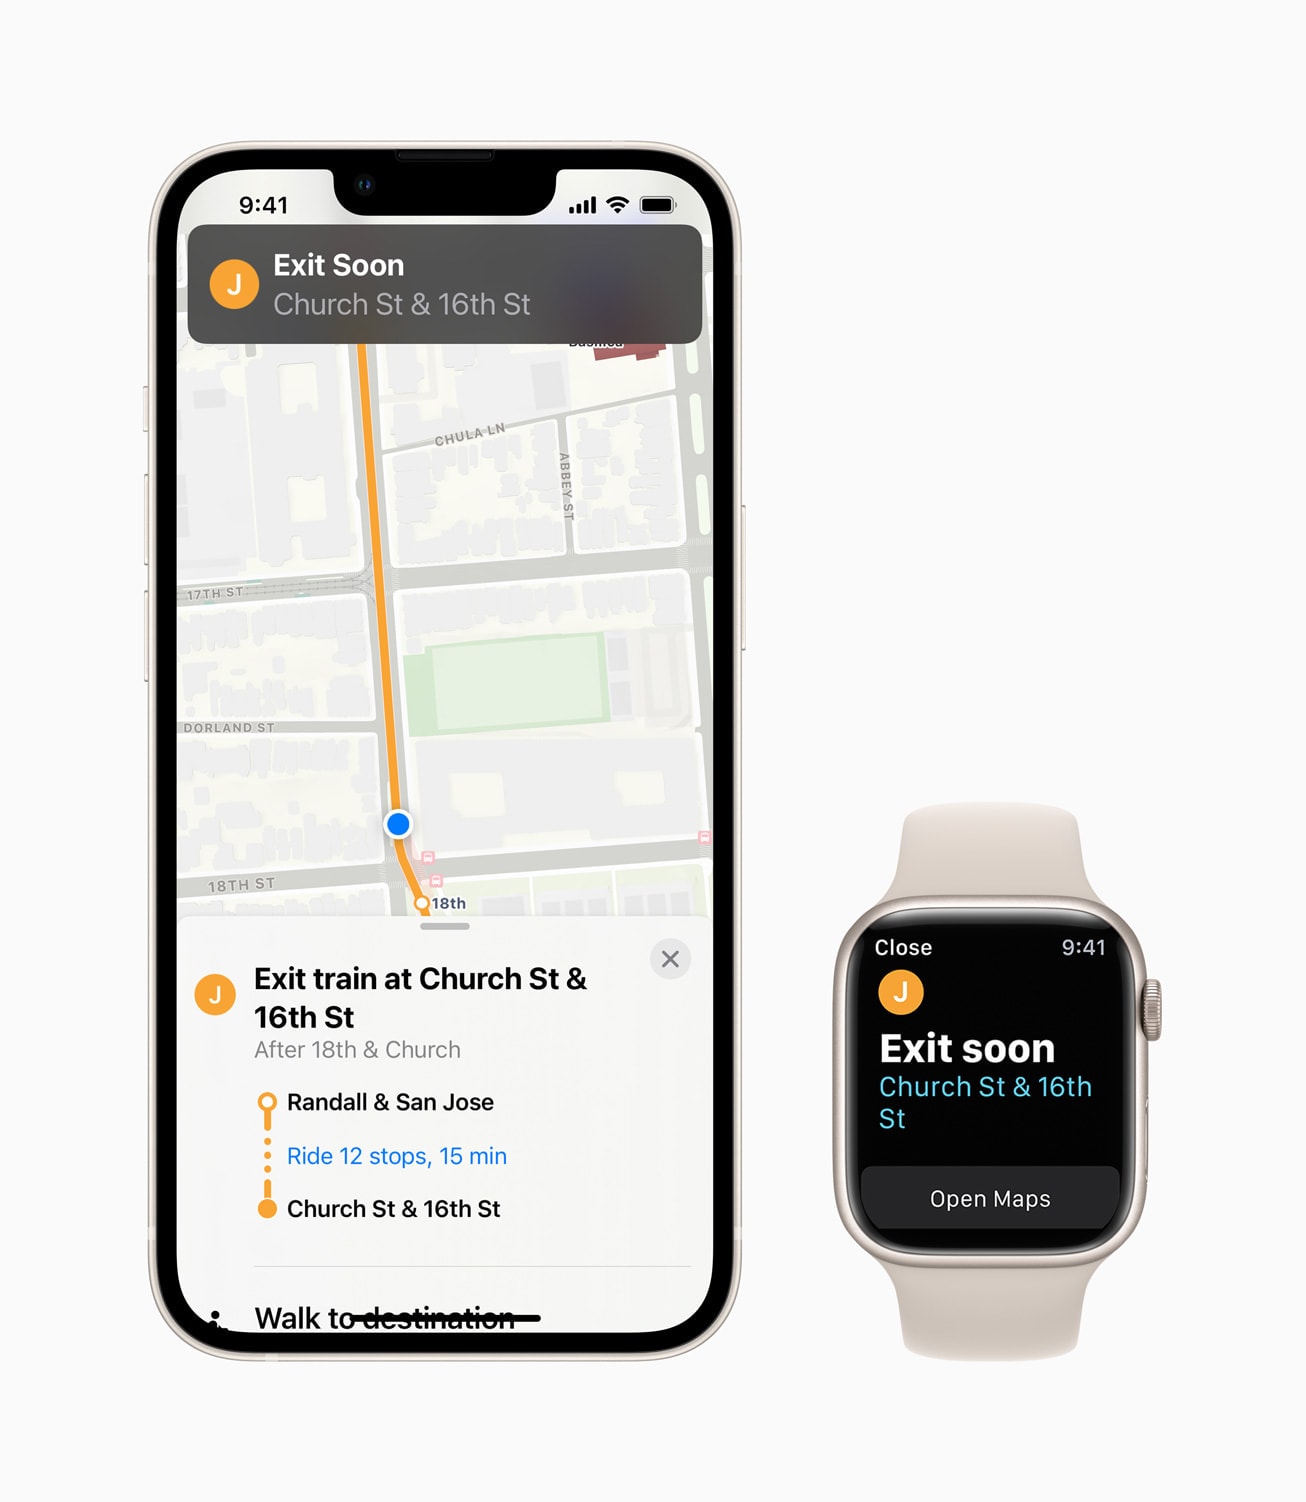 Better transit directions can interact with your Apple Watch.